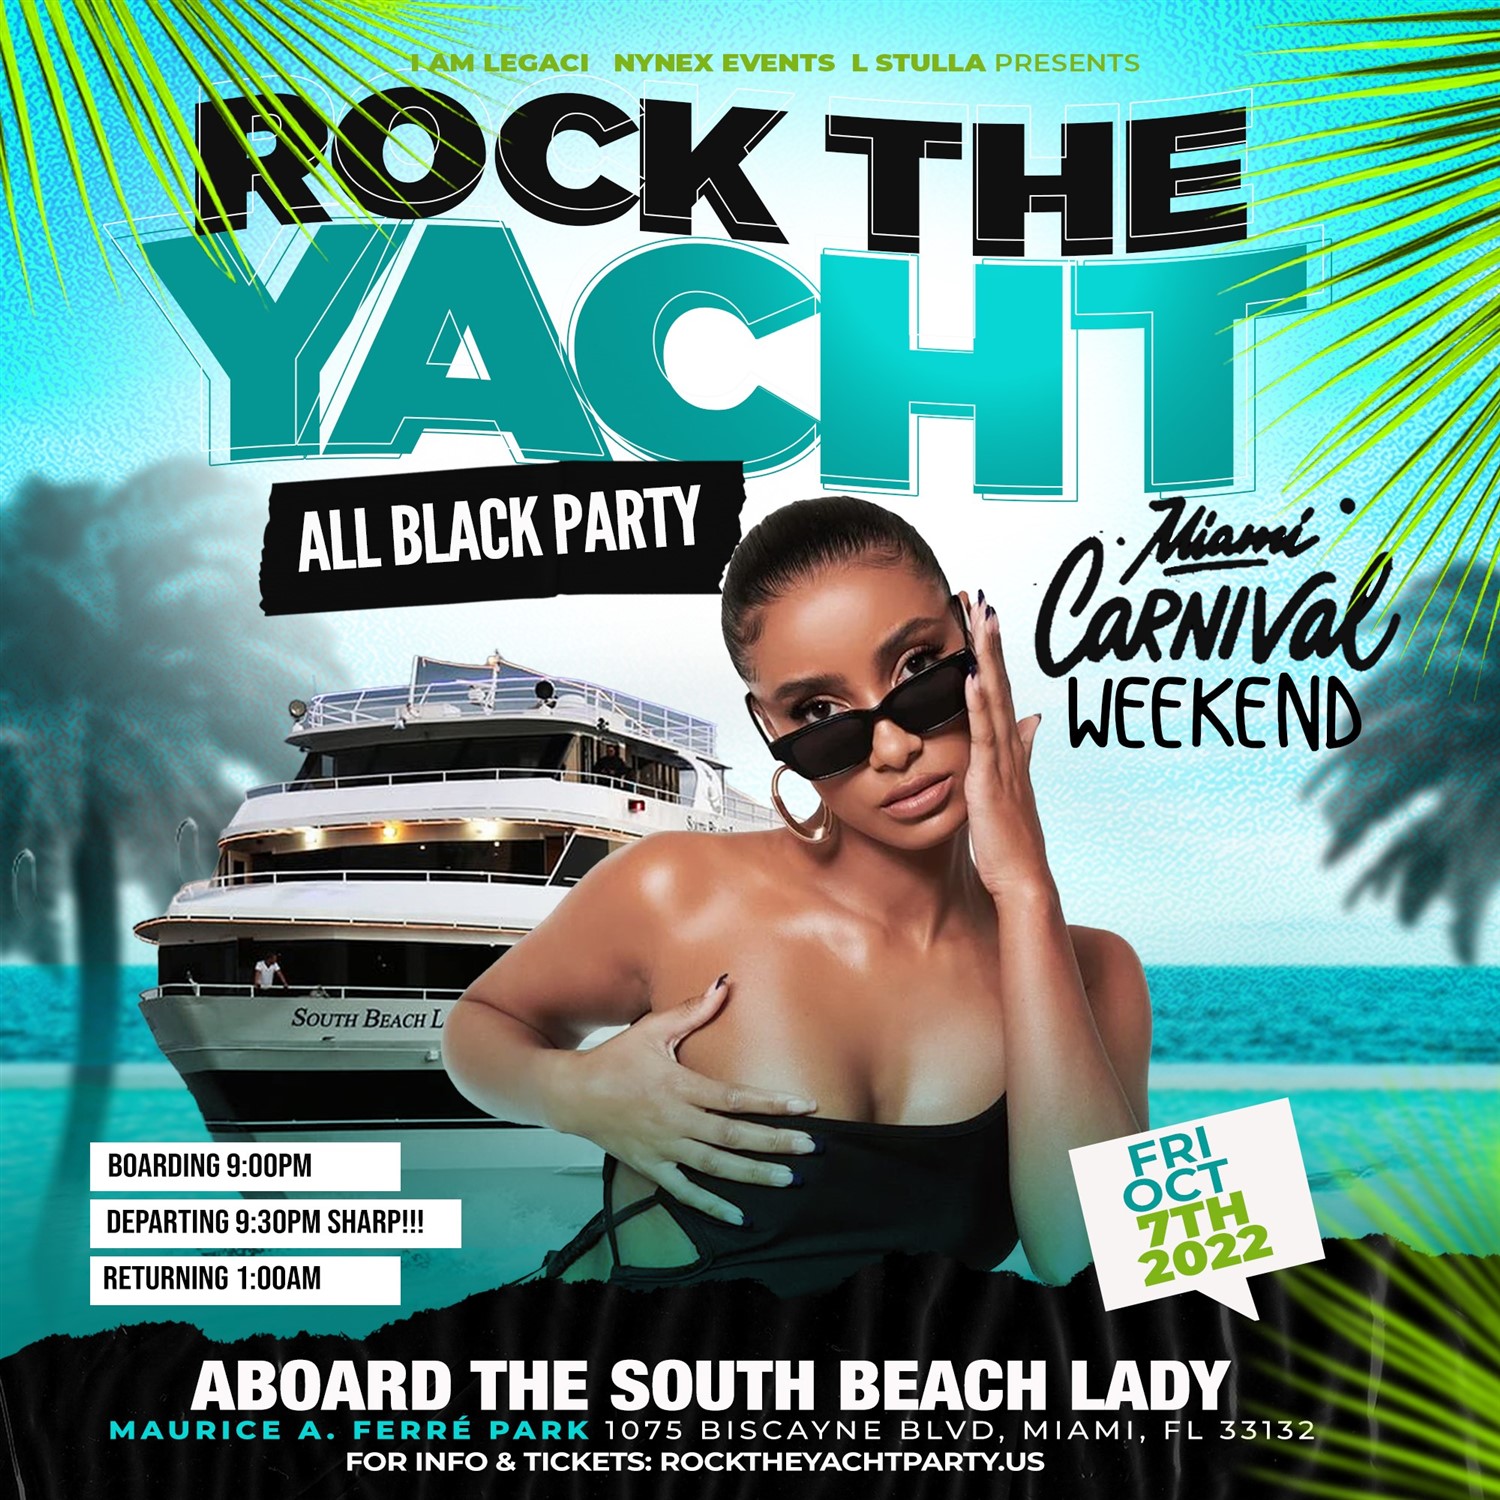 ROCK THE YACHT 2022 ANNUAL ALL BLACK YACHT PARTY MIAMI CARNIVAL  on Oct 07, 21:00@South Beach Lady - Buy tickets and Get information on www.fetefinders.com tickets.fetefinders.com